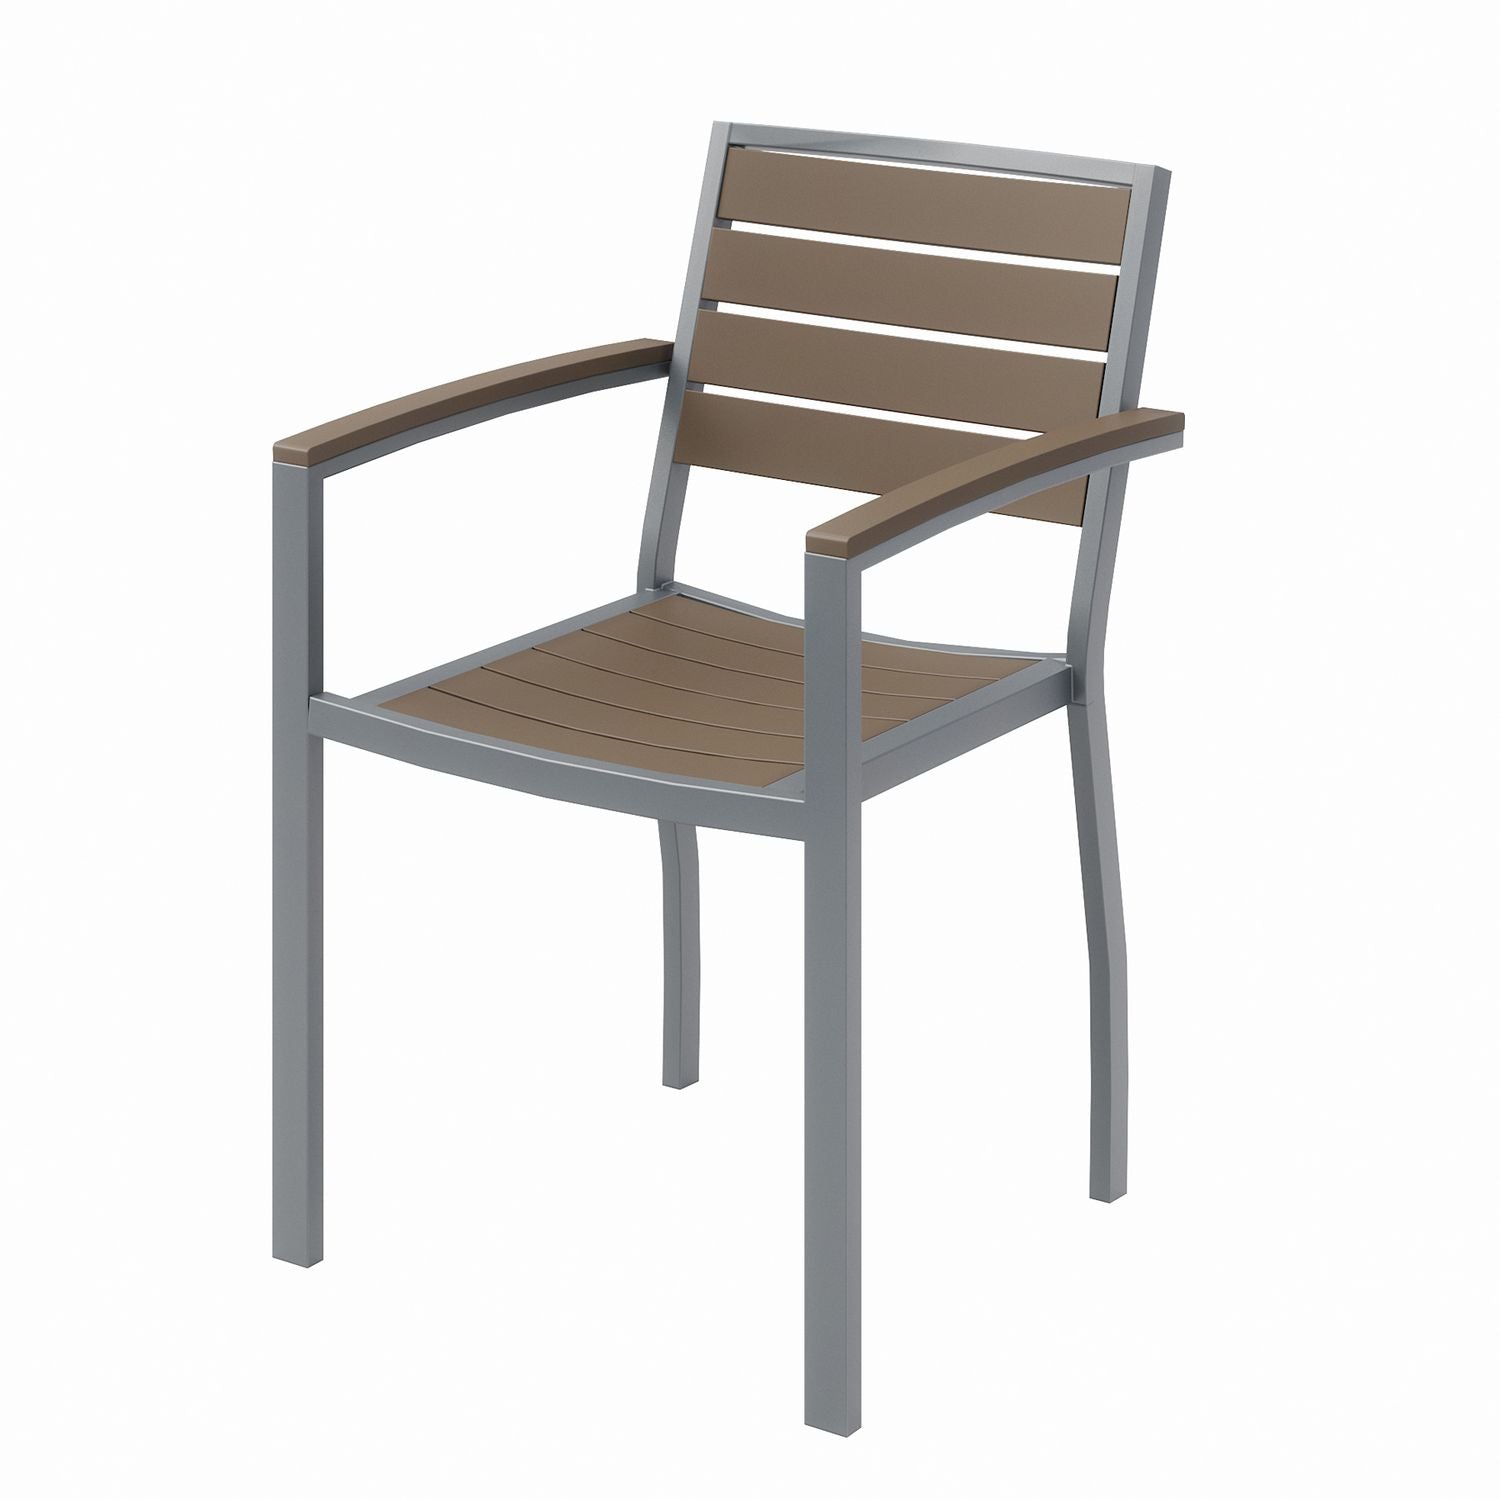 eveleen-outdoor-patio-table-with-six-mocha-powder-coated-polymer-chairs-32-x-55-x-29-mocha-ships-in-4-6-business-days_kfi840031918529 - 3